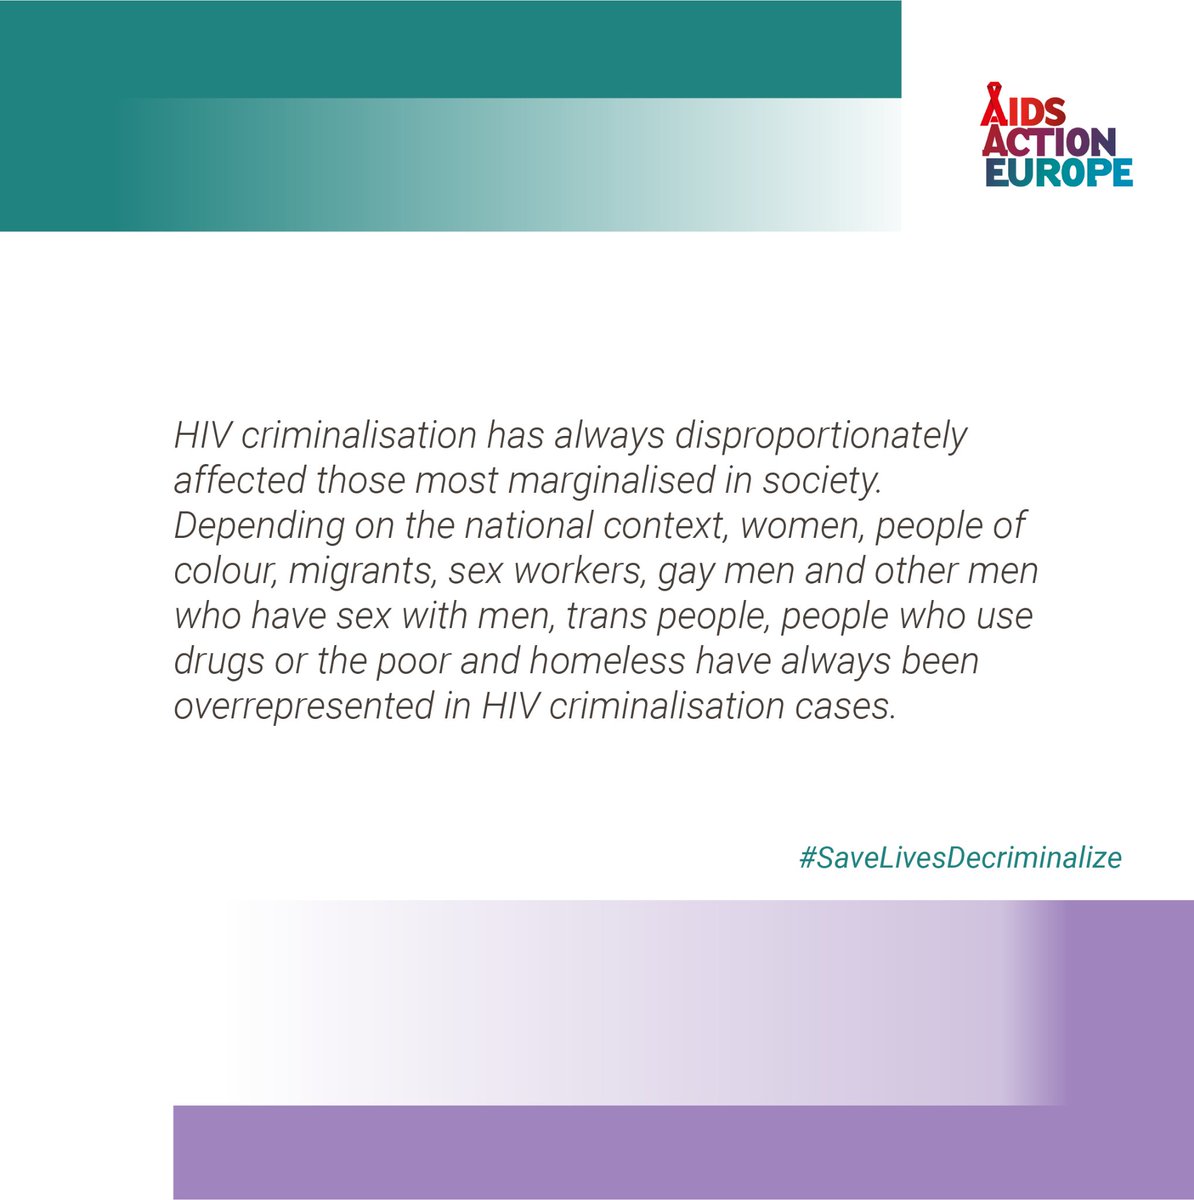 On #ZeroDiscriminationDay we stand with PLHIV and key populations in the fight against criminalisation of us and our behaviours.We cannot talk about success in HIV response when people are criminalised for their identity,their choices and for who they love #SaveLivesDecriminalise